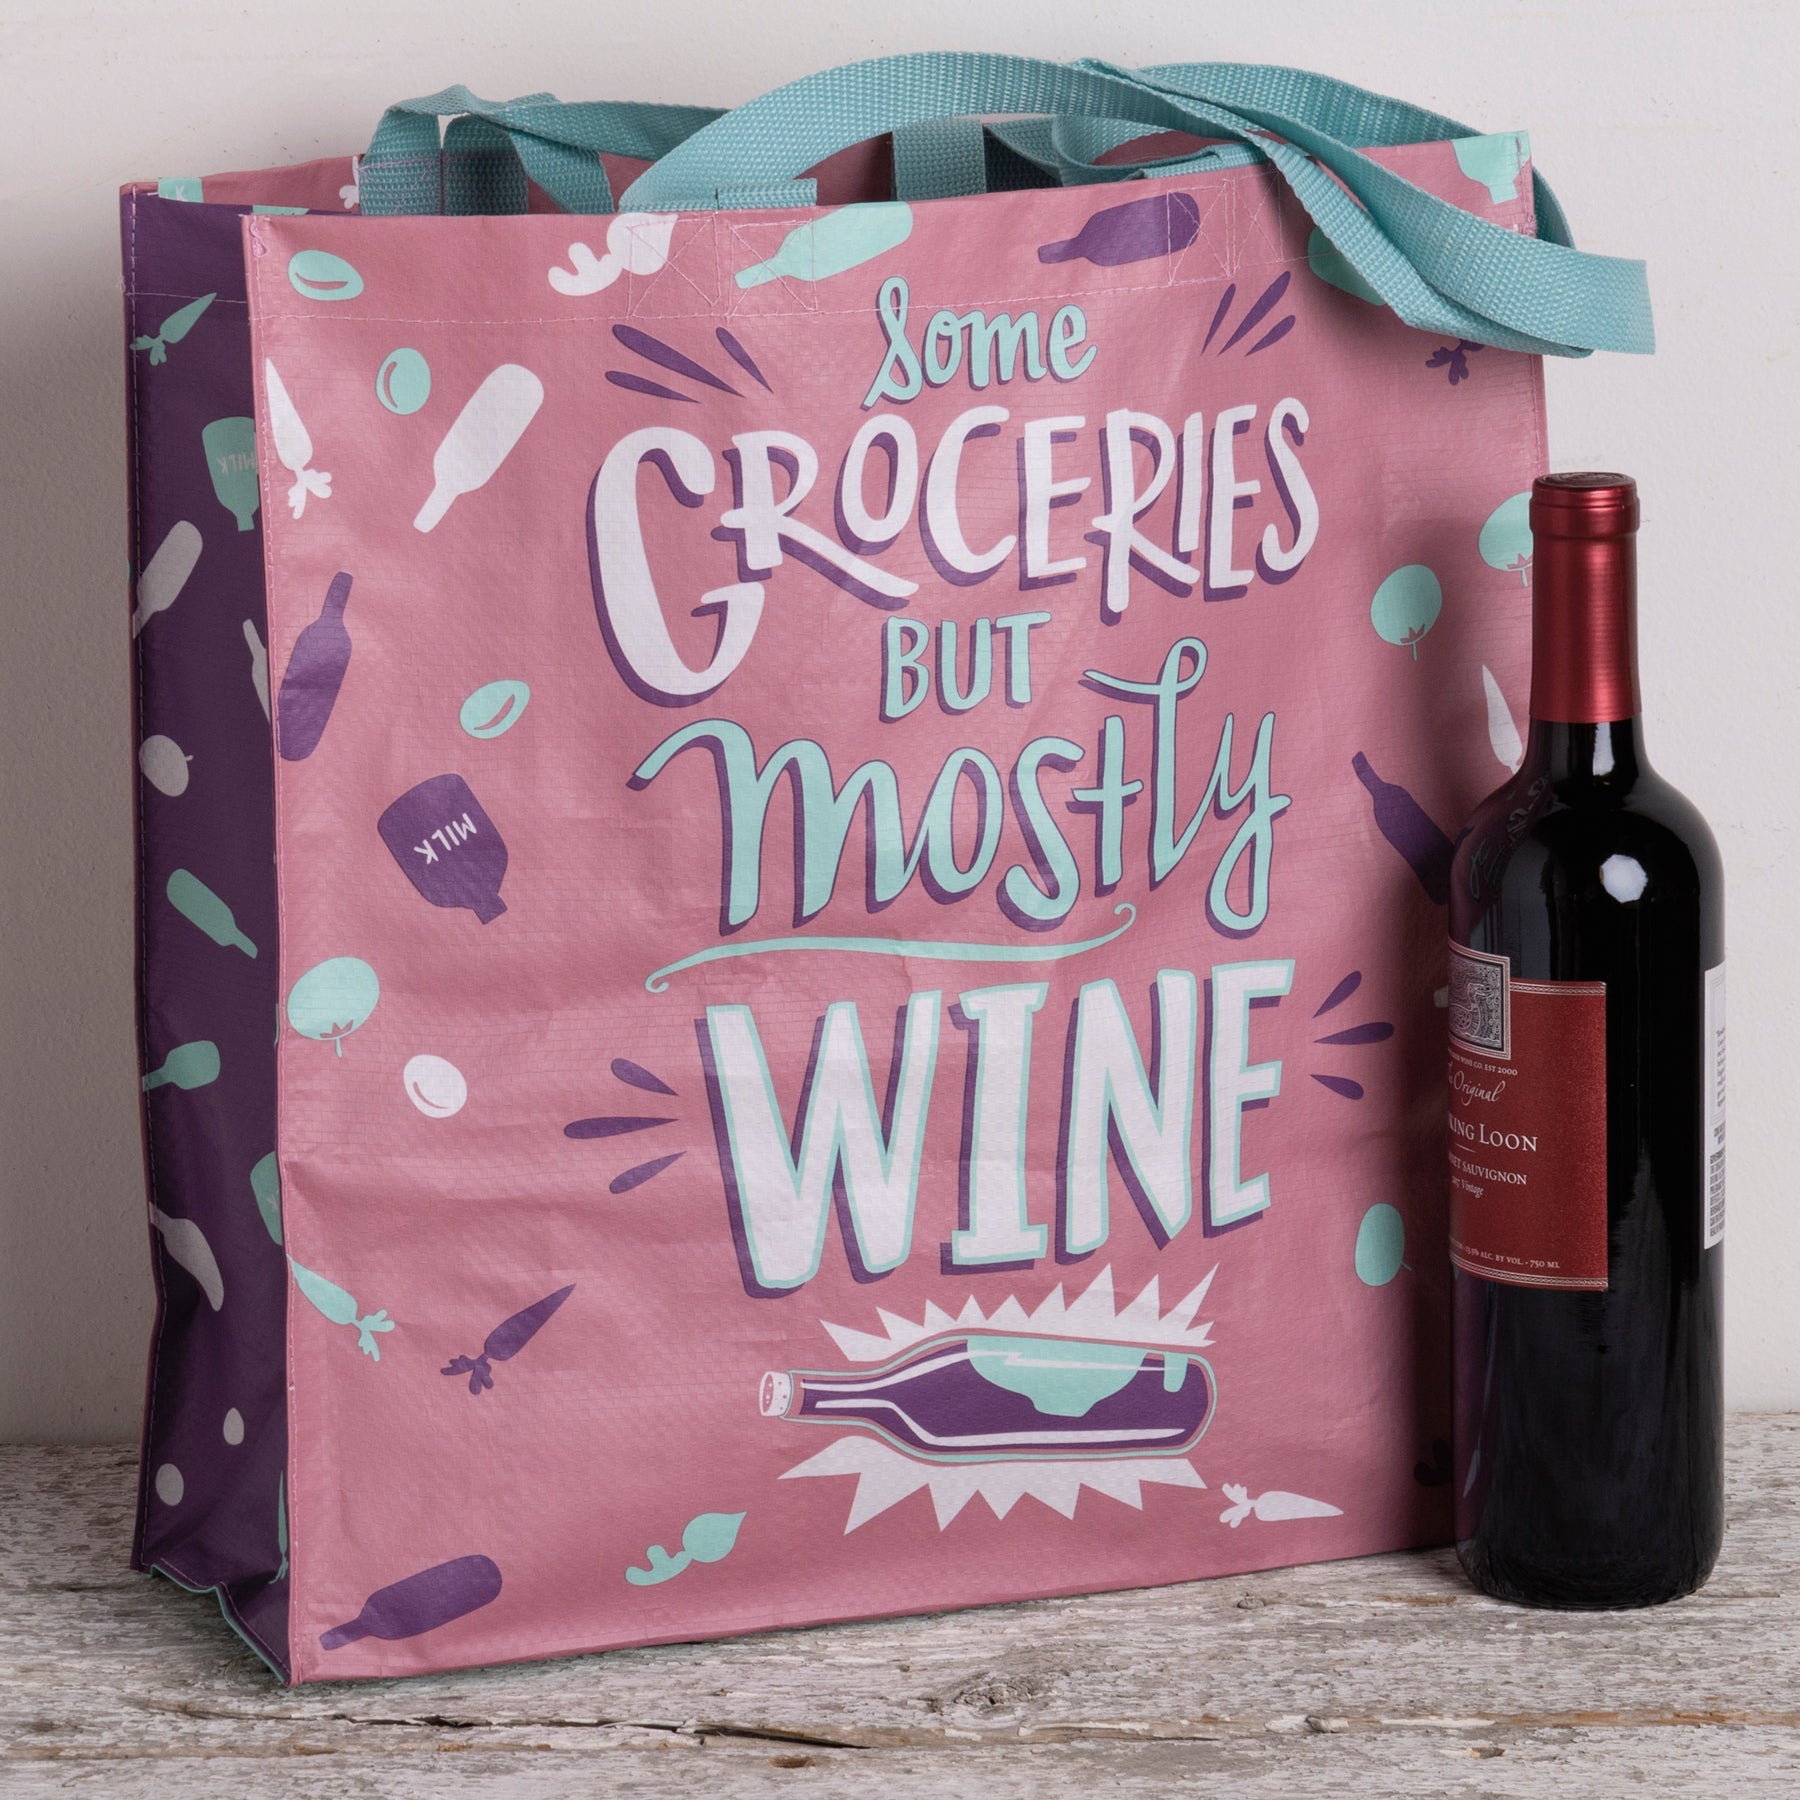 Some Groceries But Mostly Wine Large Market Tote Bag in Pink and Blue | 15.50" x 15.25" x 6"